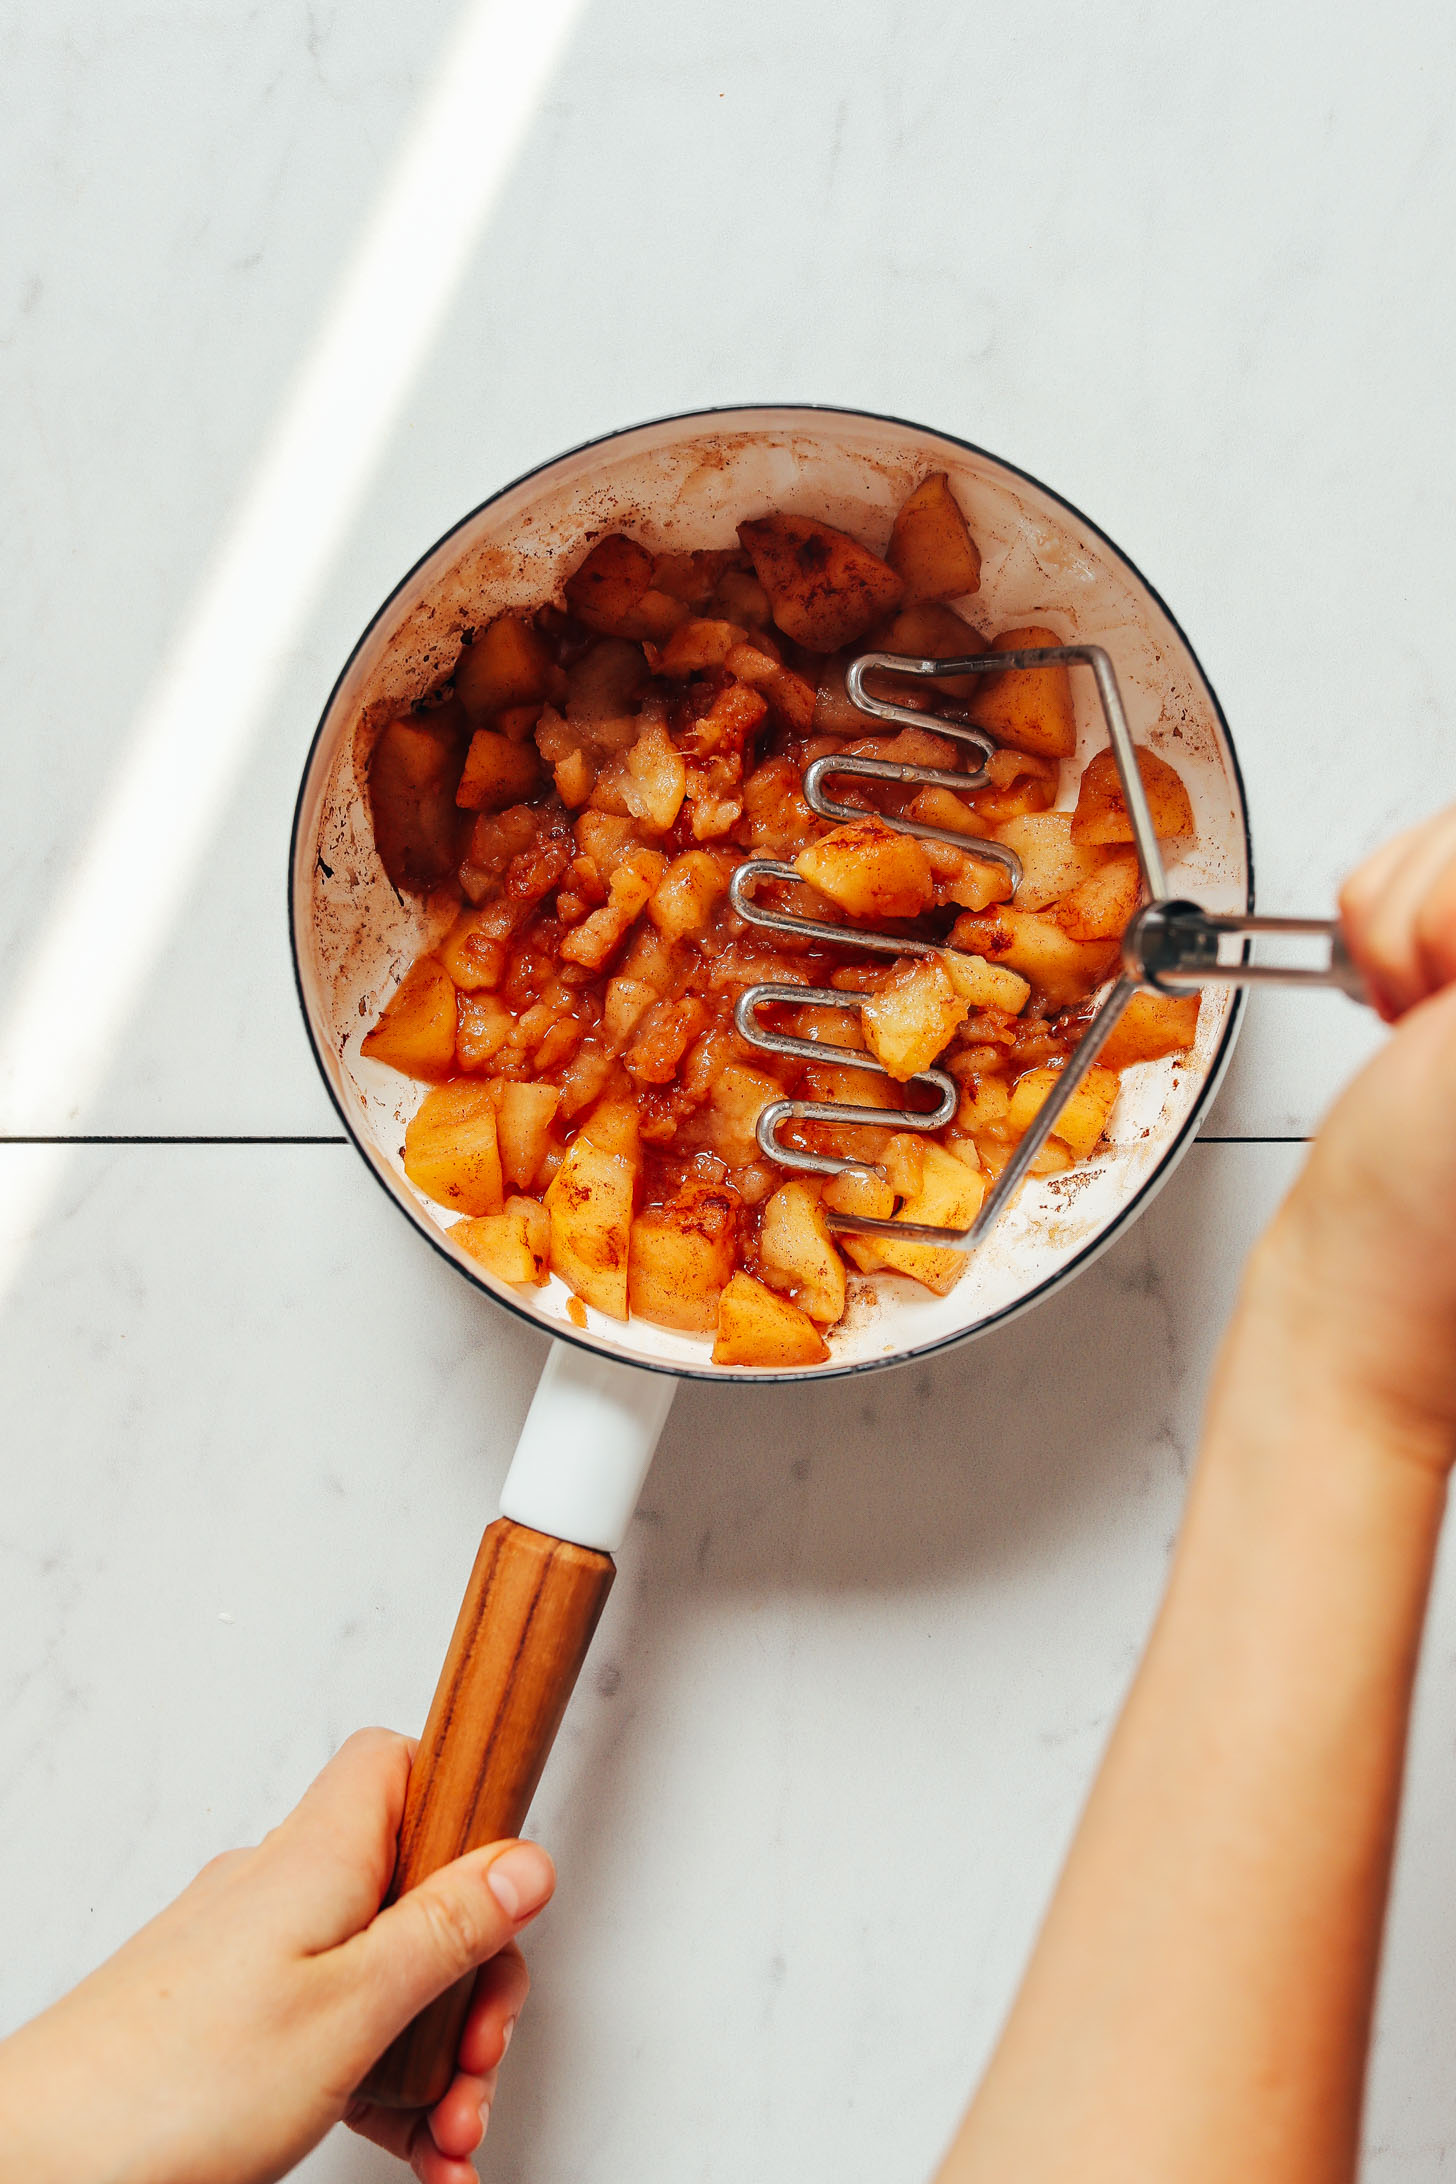 Using a potato masher to smash apples in a saucepan for easy homemade applesauce